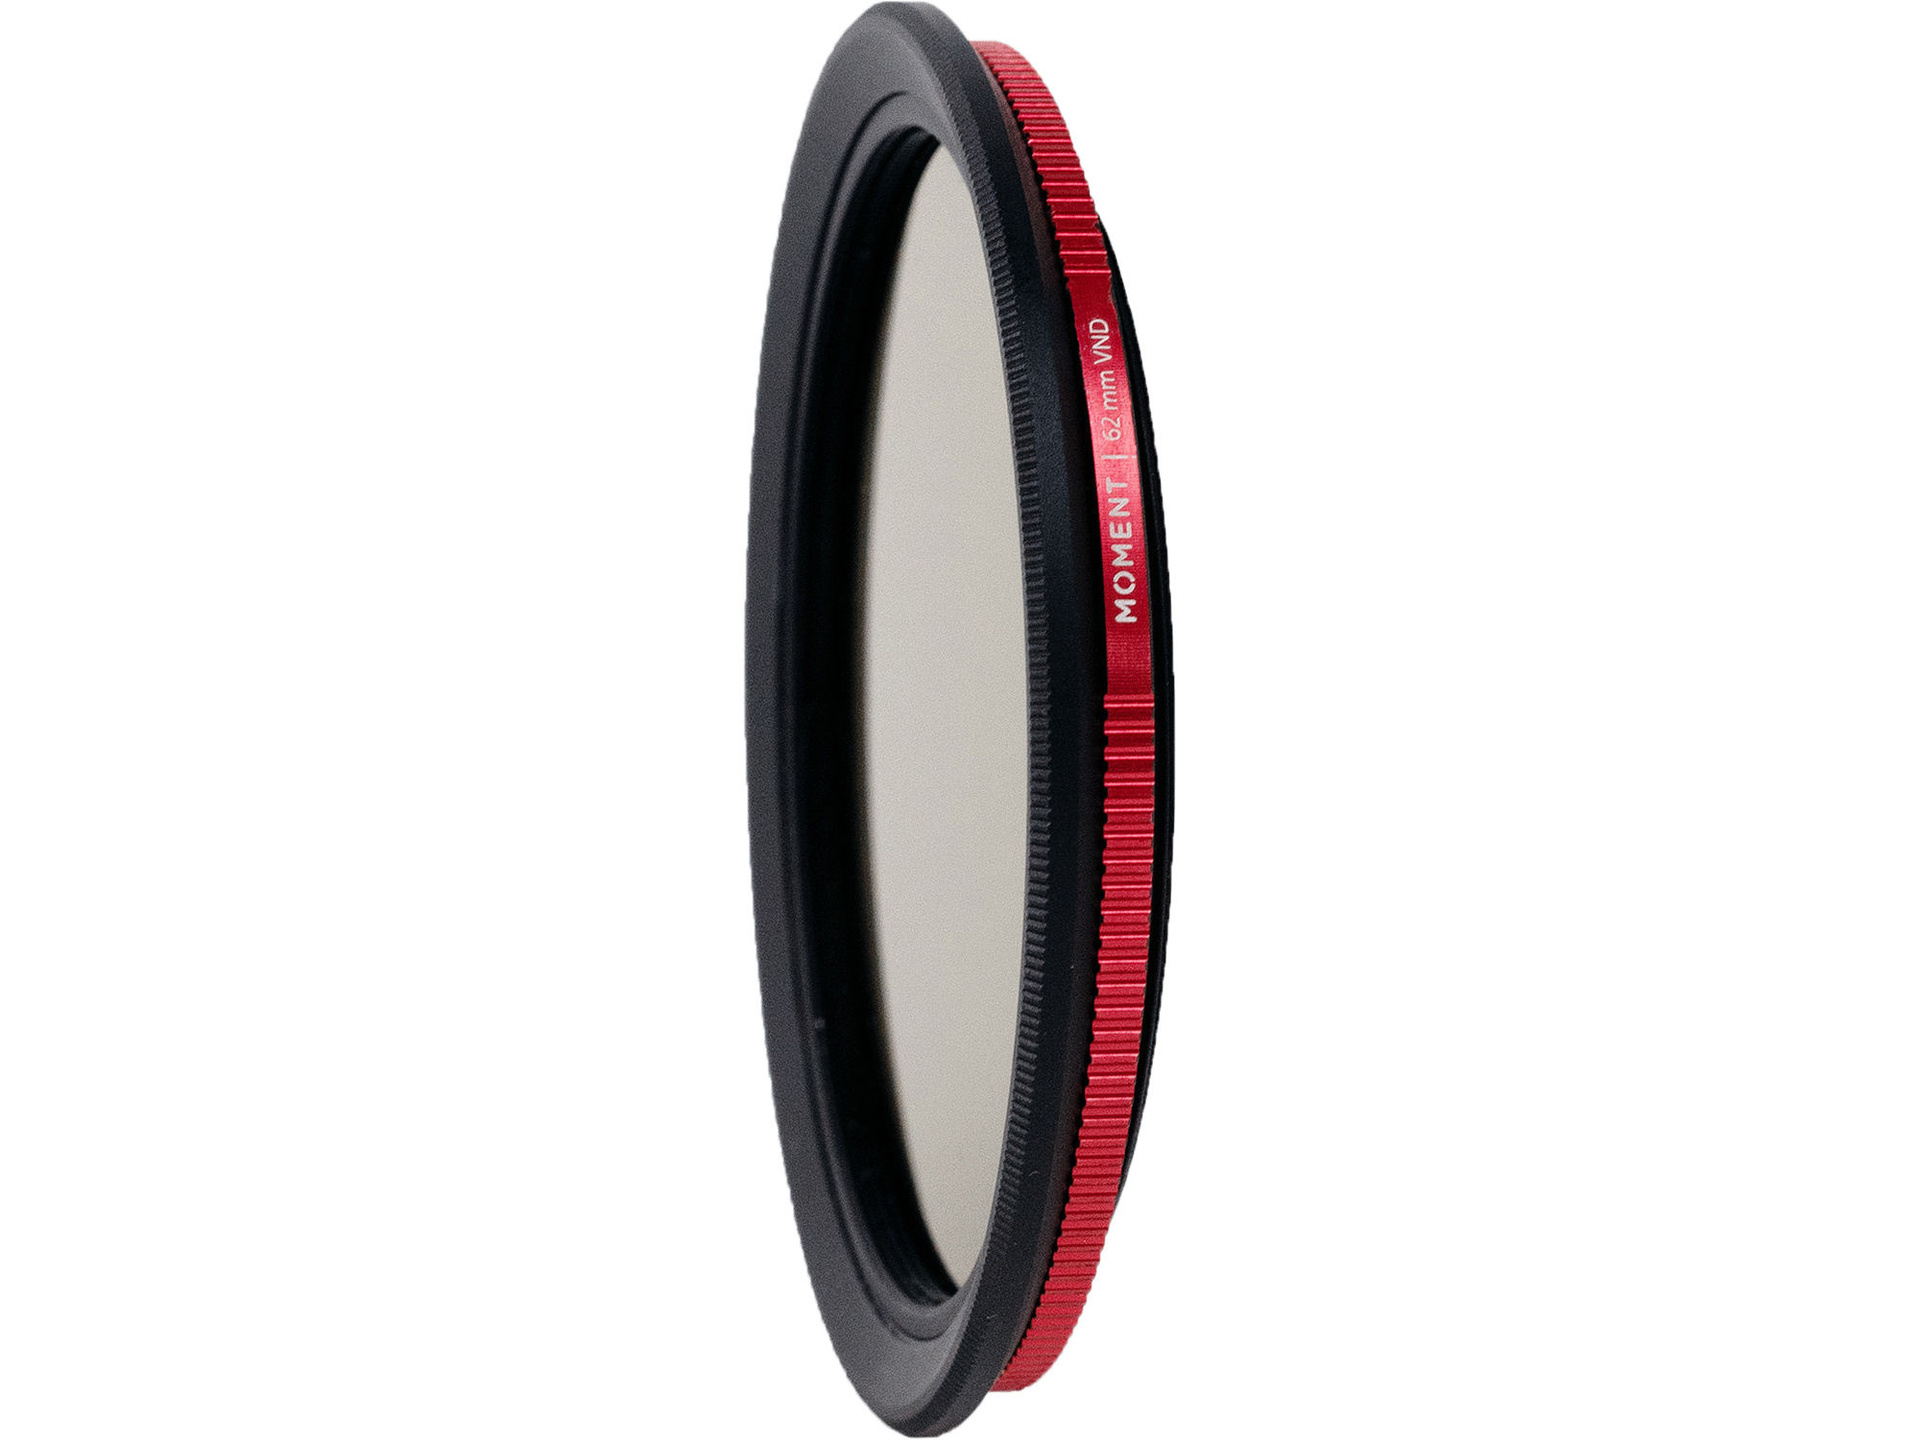 Moment 62mm Variable Neutral Density 1.8 to 2.7 Filter (6 to 9-Stop)